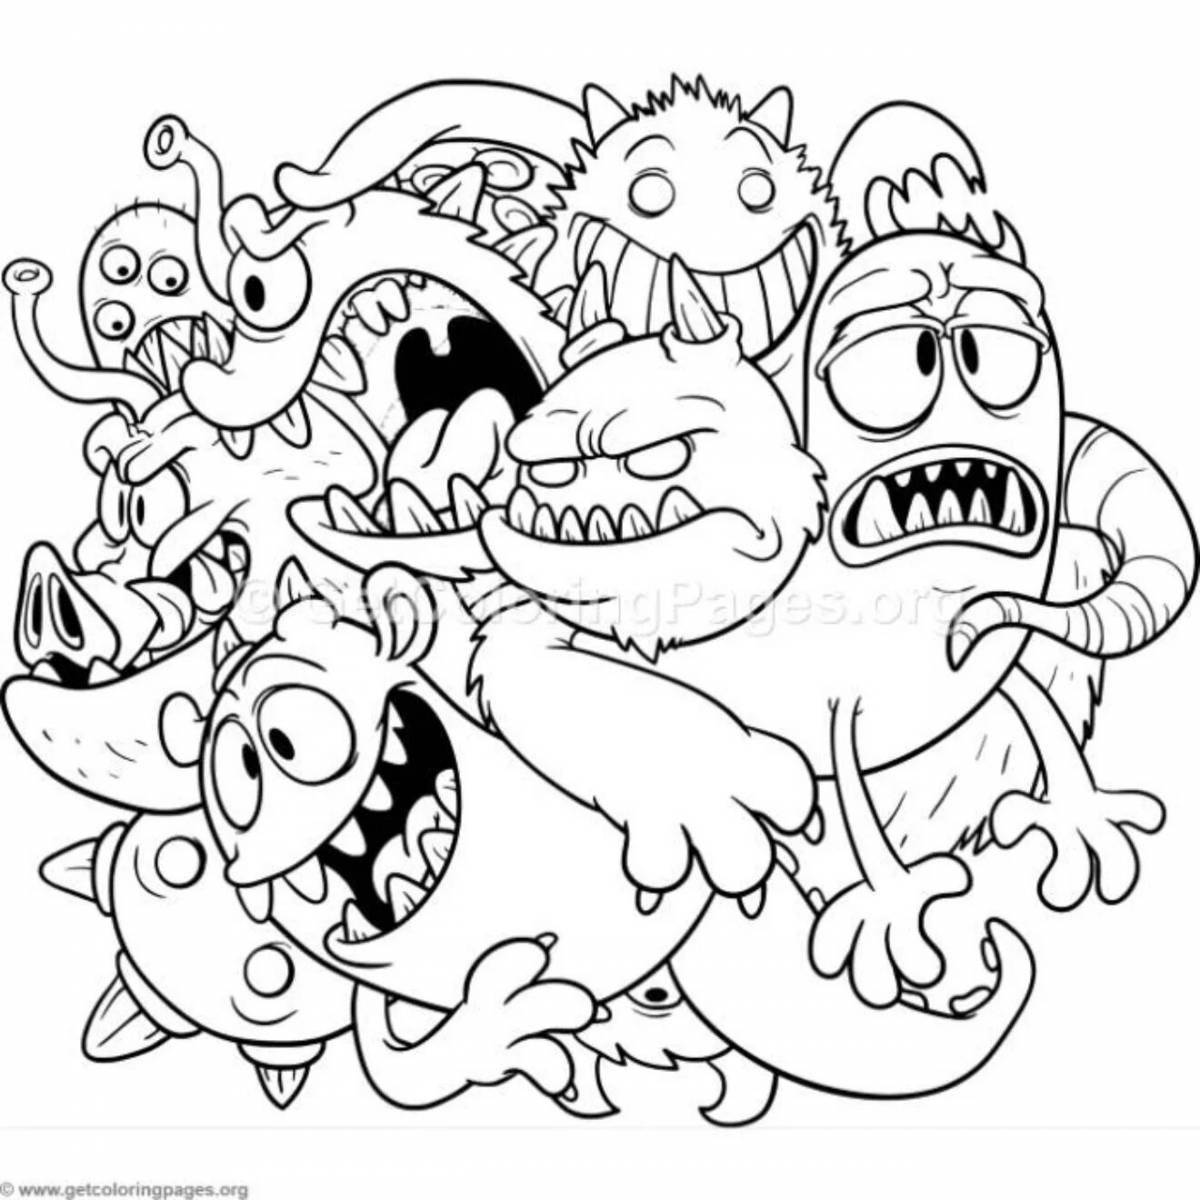 Excellent maxi monsters coloring book